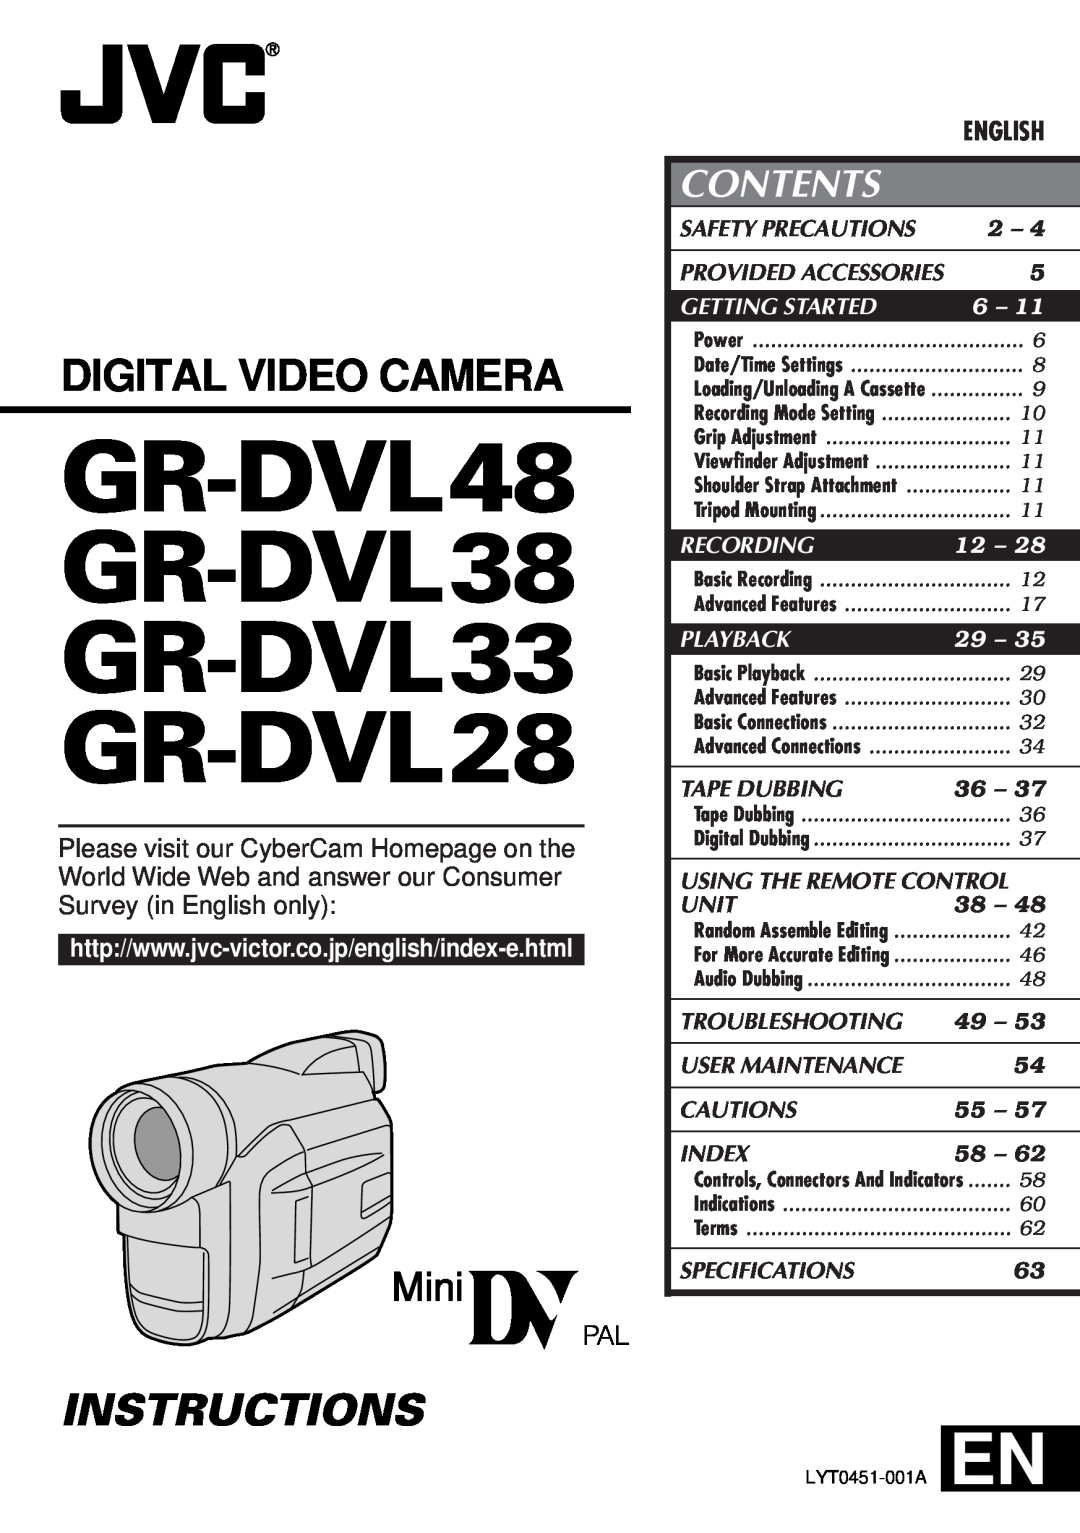 JVC GR-DVL33 specifications Contents, Safety Precautions, Tape Dubbing, Using The Remote Control, Unit, Troubleshooting 